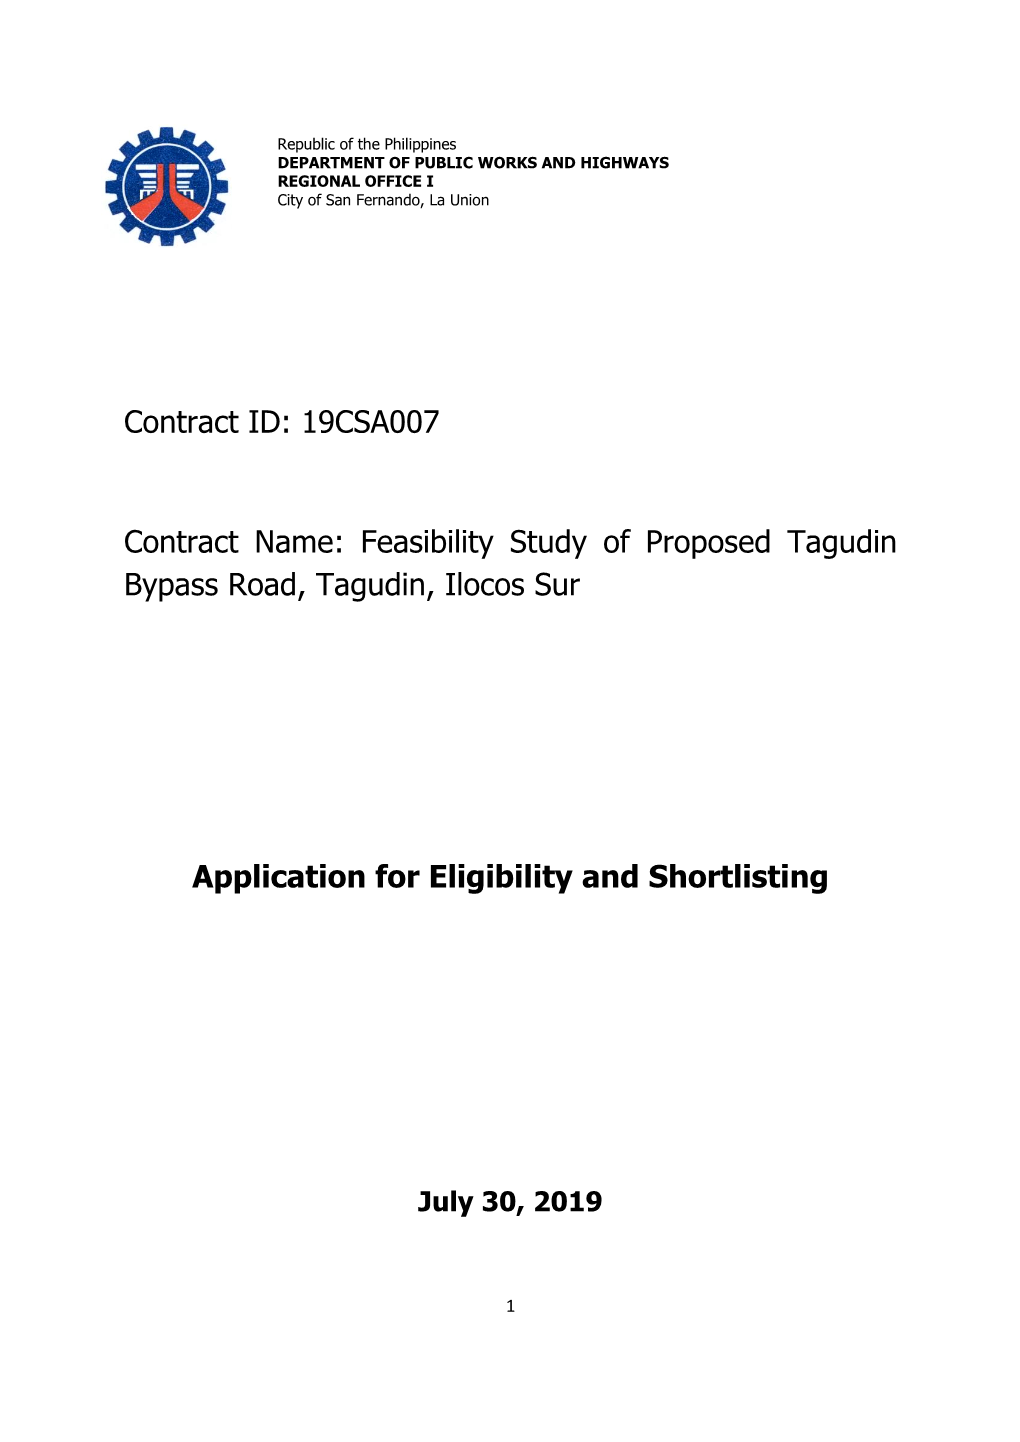 Feasibility Study of Proposed Tagudin Bypass Road, Tagudin, Ilocos Sur